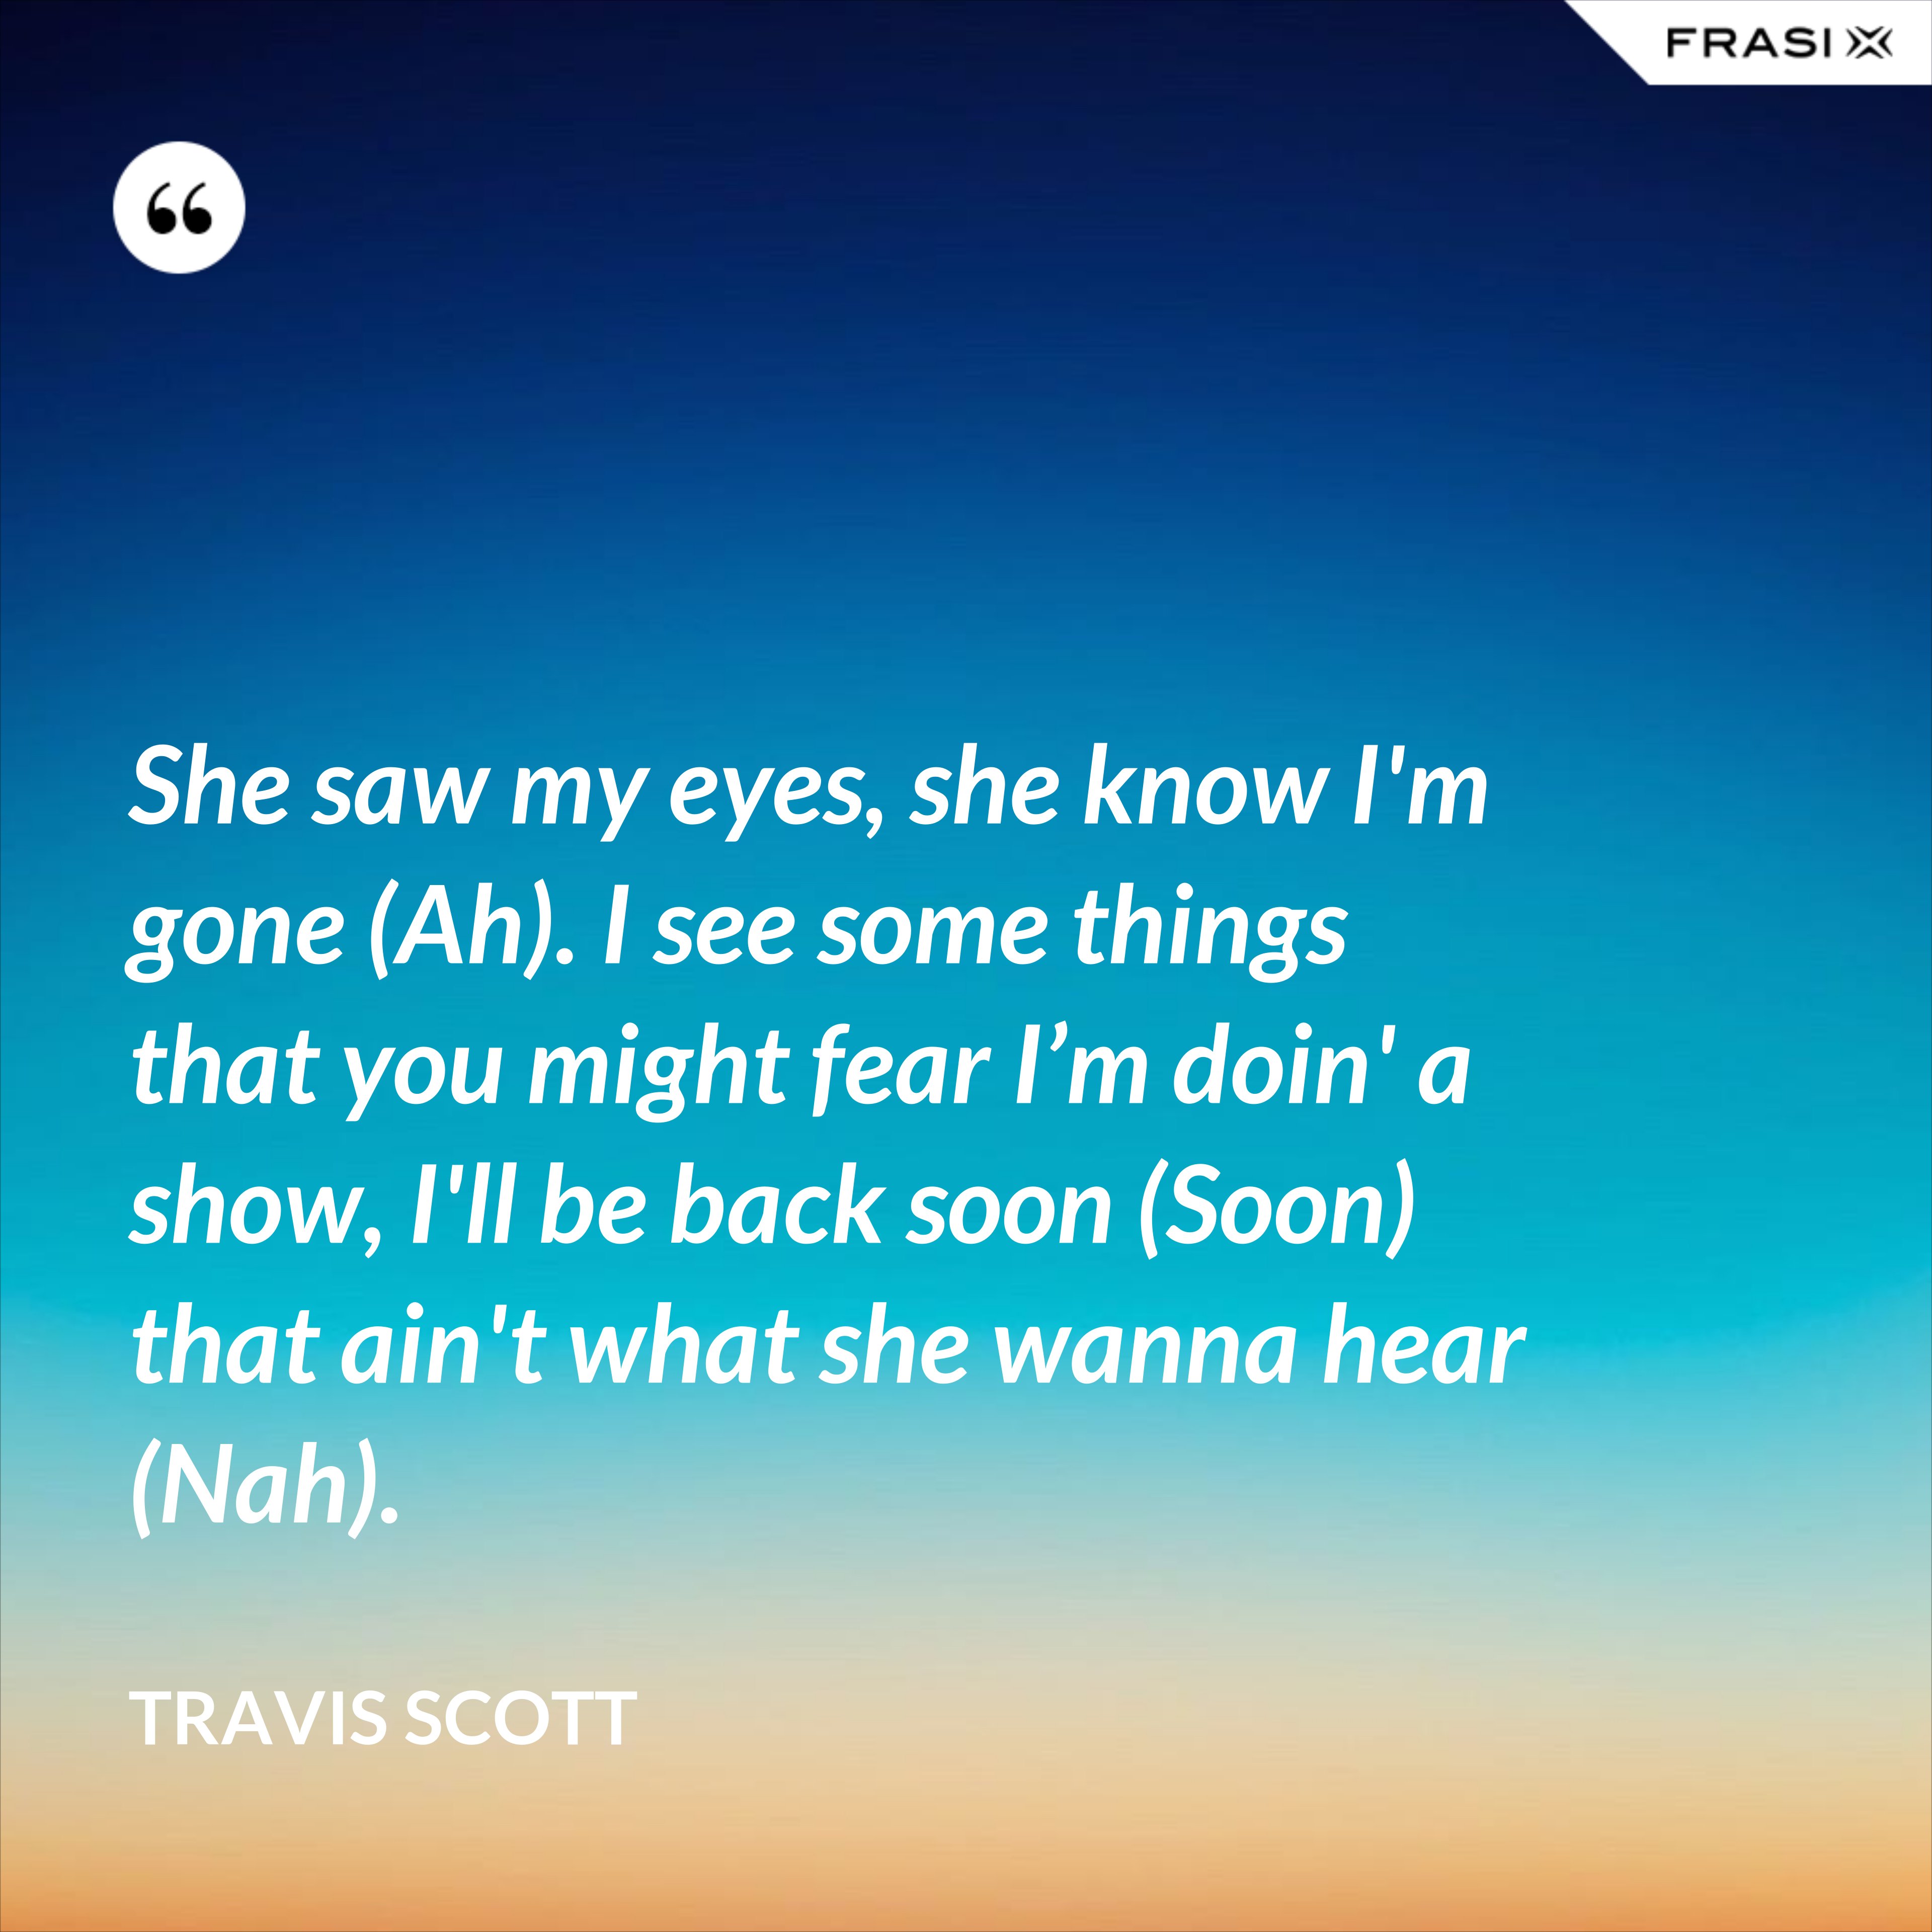 She saw my eyes, she know I'm gone (Ah). I see some things that you might fear I’m doin' a show, I'll be back soon (Soon) that ain't what she wanna hear (Nah). - Travis Scott